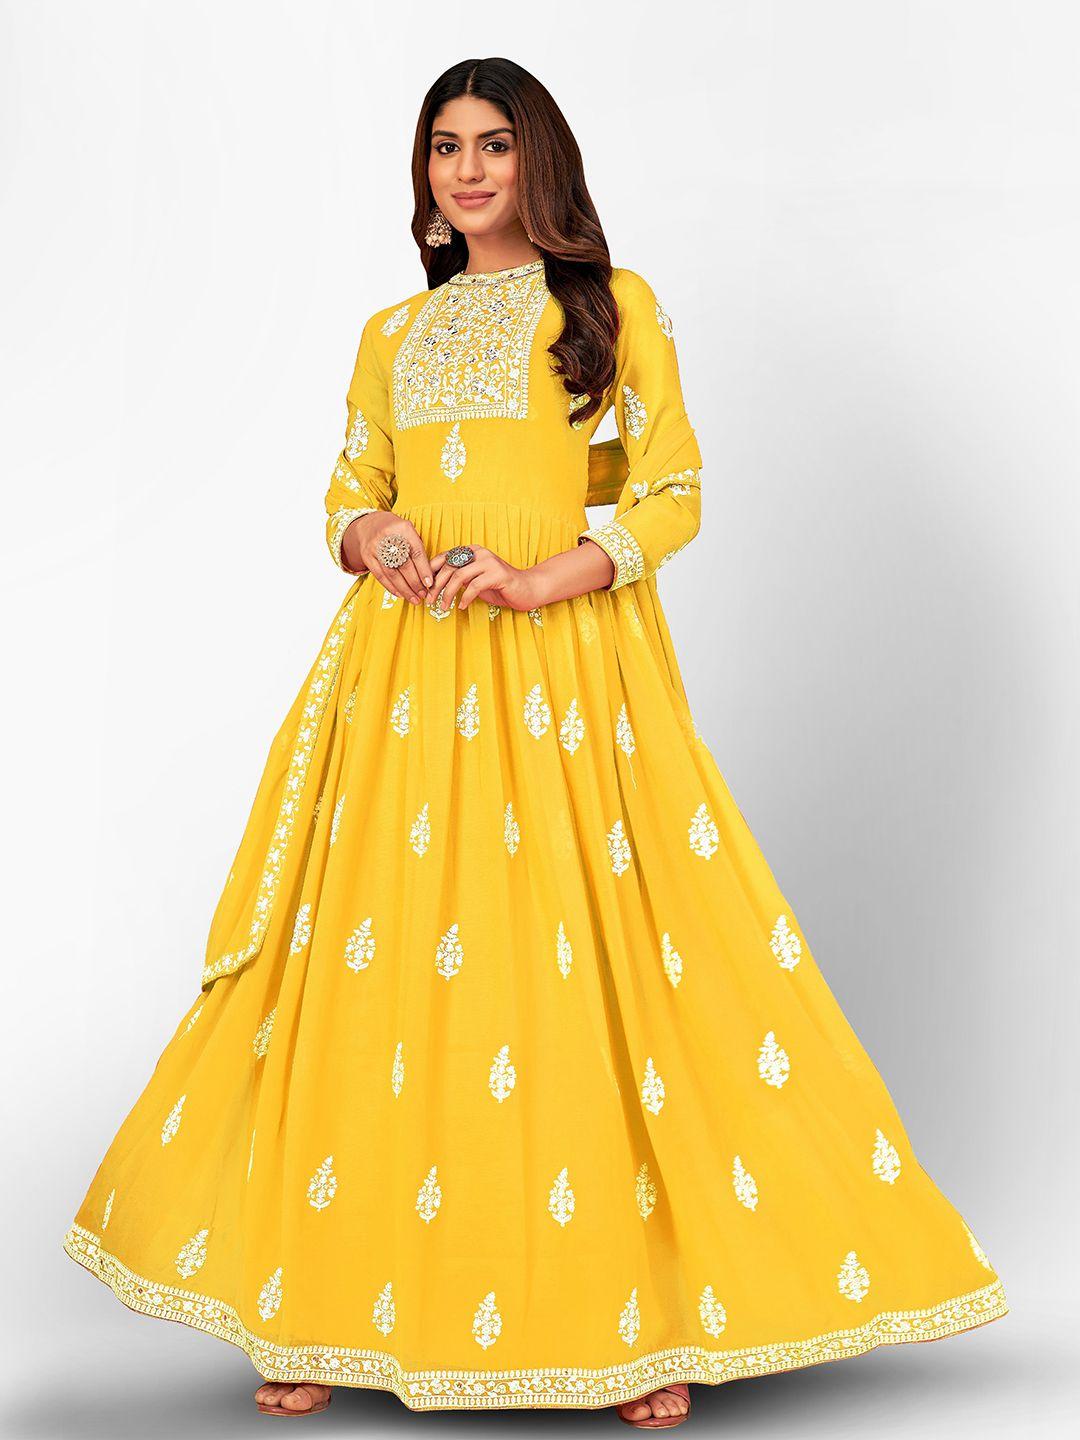 divine-international-trading-co-yellow-&-white-embroidered-unstitched-dress-material